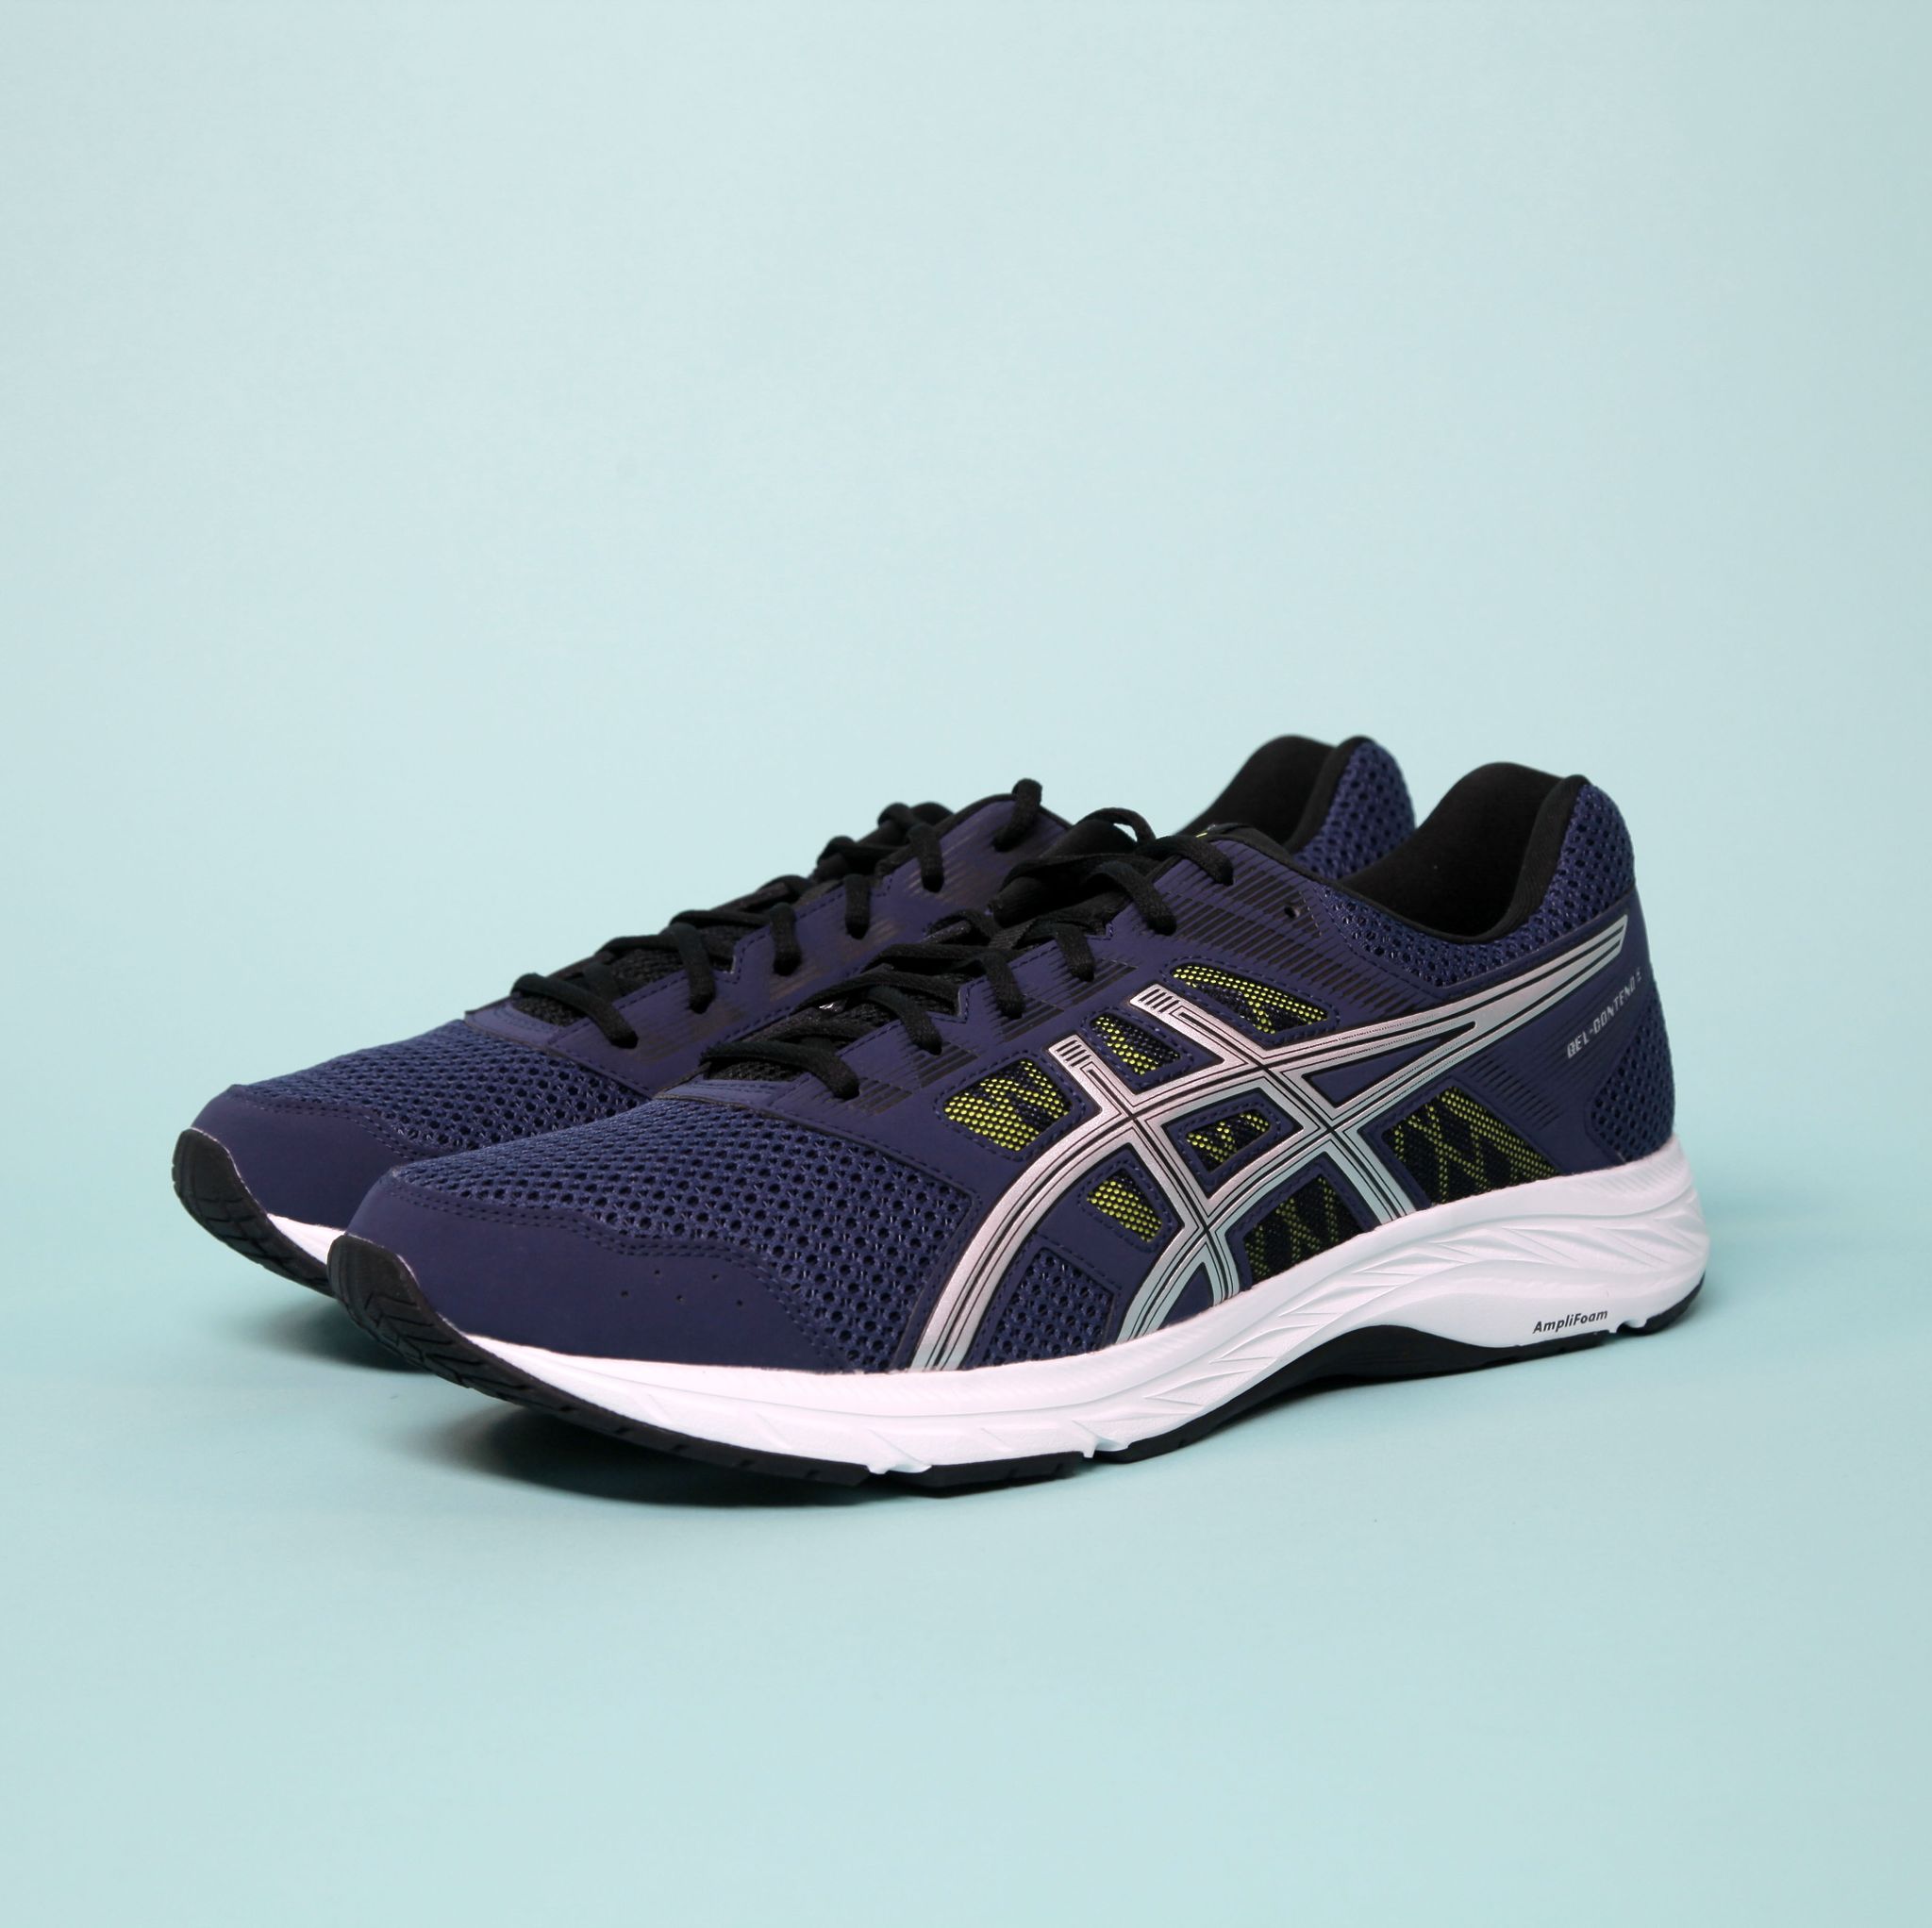 alarma primer ministro regular This £55 Asics shoe won our best value shoe award, here's why